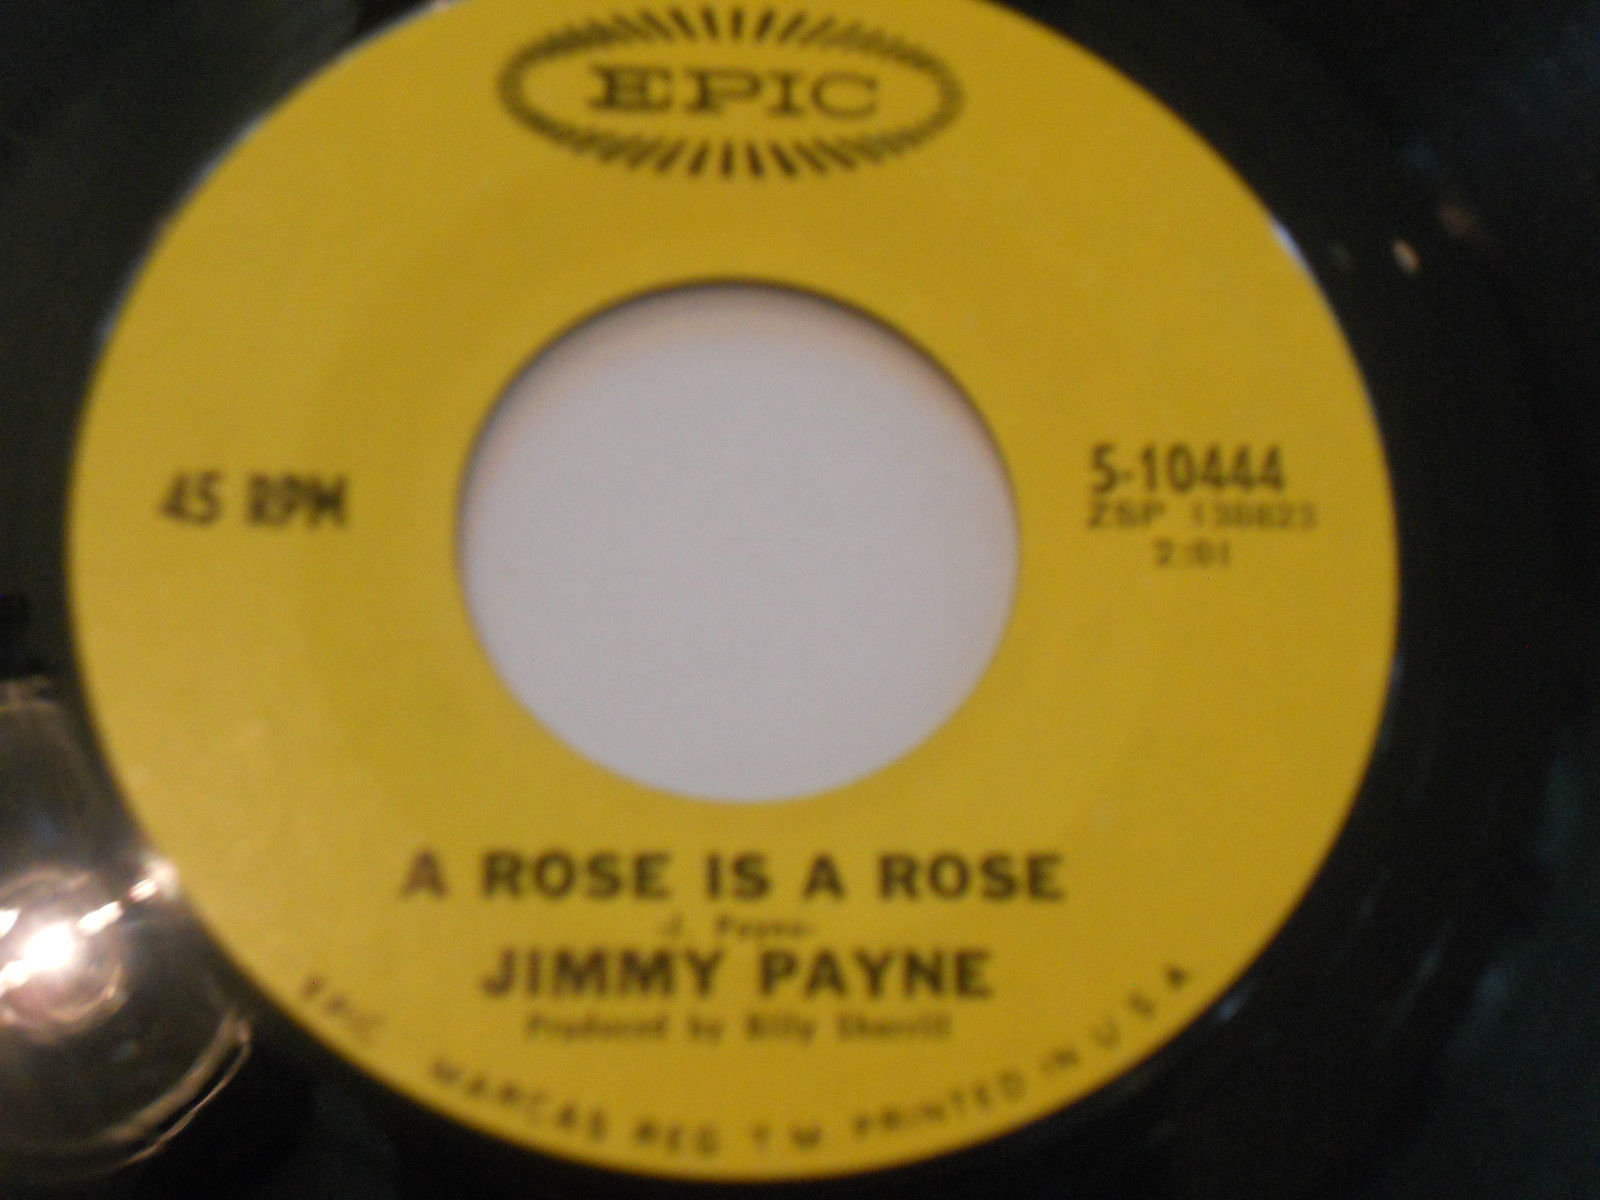 Primary image for JIMMY PAYNE VG++ A Rose Is A Rose 45 L.A. Angels Epic 5-10444 vinyl